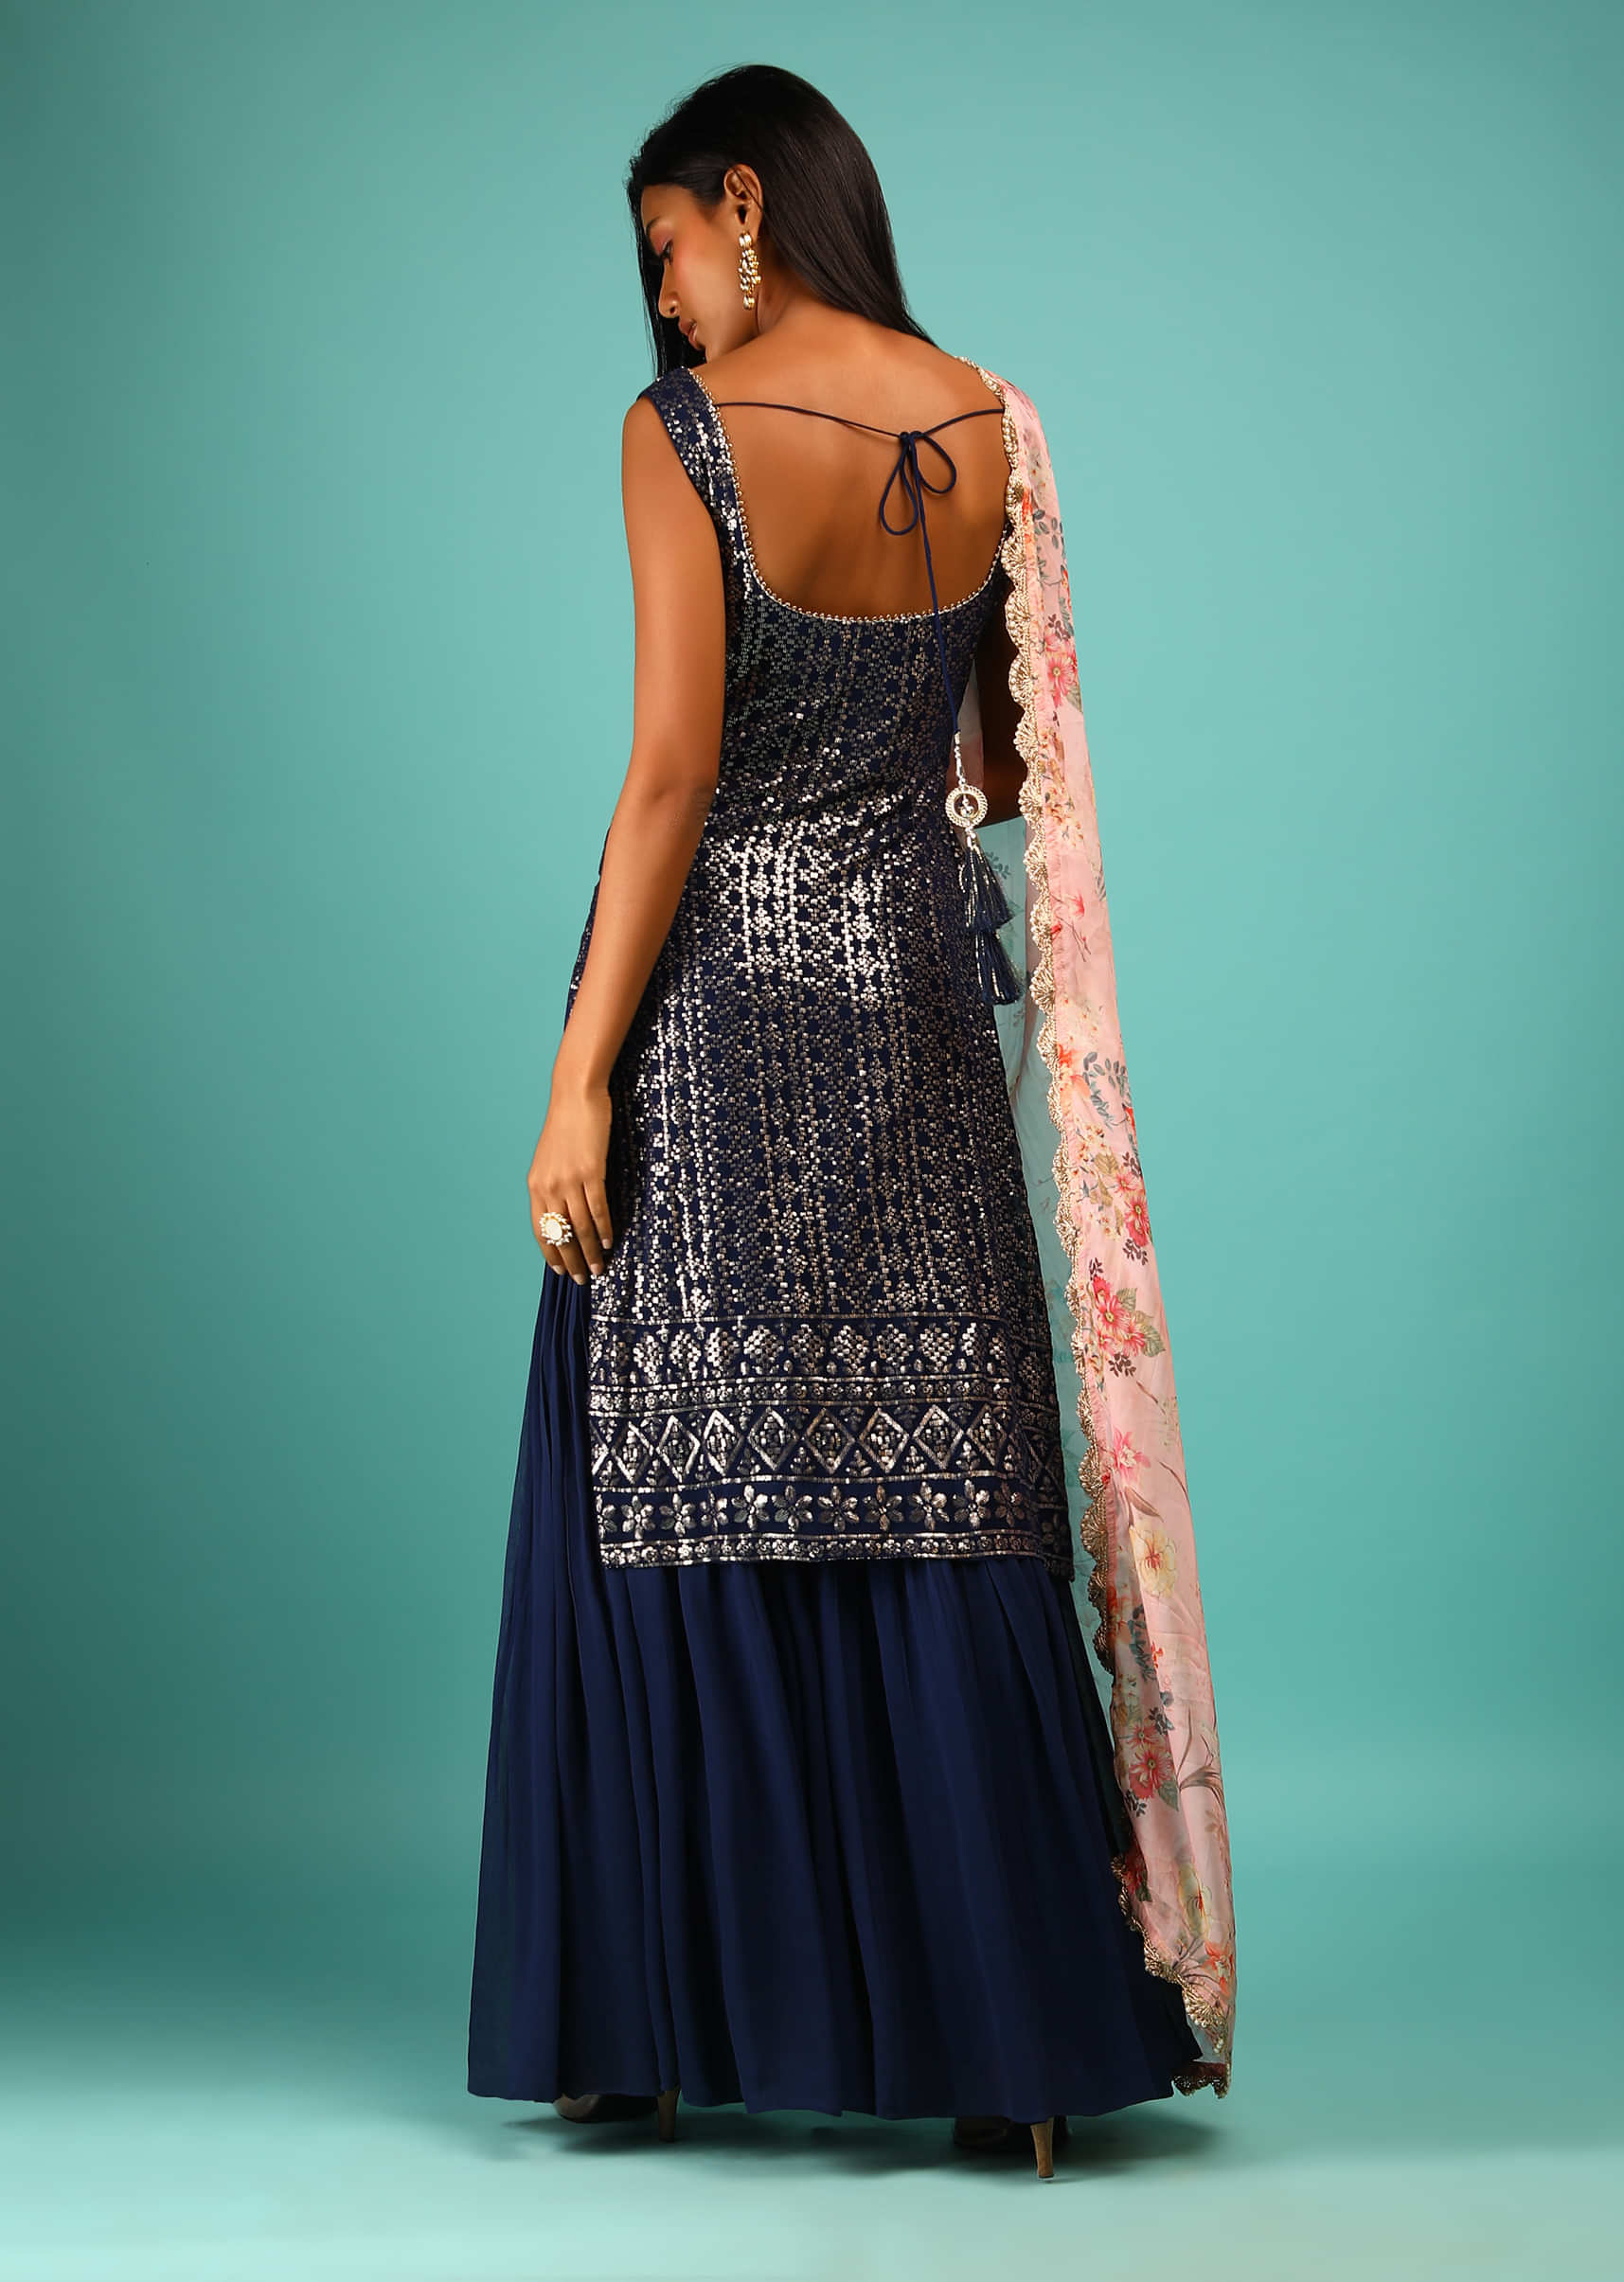 Navy Blue Sharara Suit In Georgette With Golden Sequins Embroidery And Blush Pink Floral Printed Dupatta